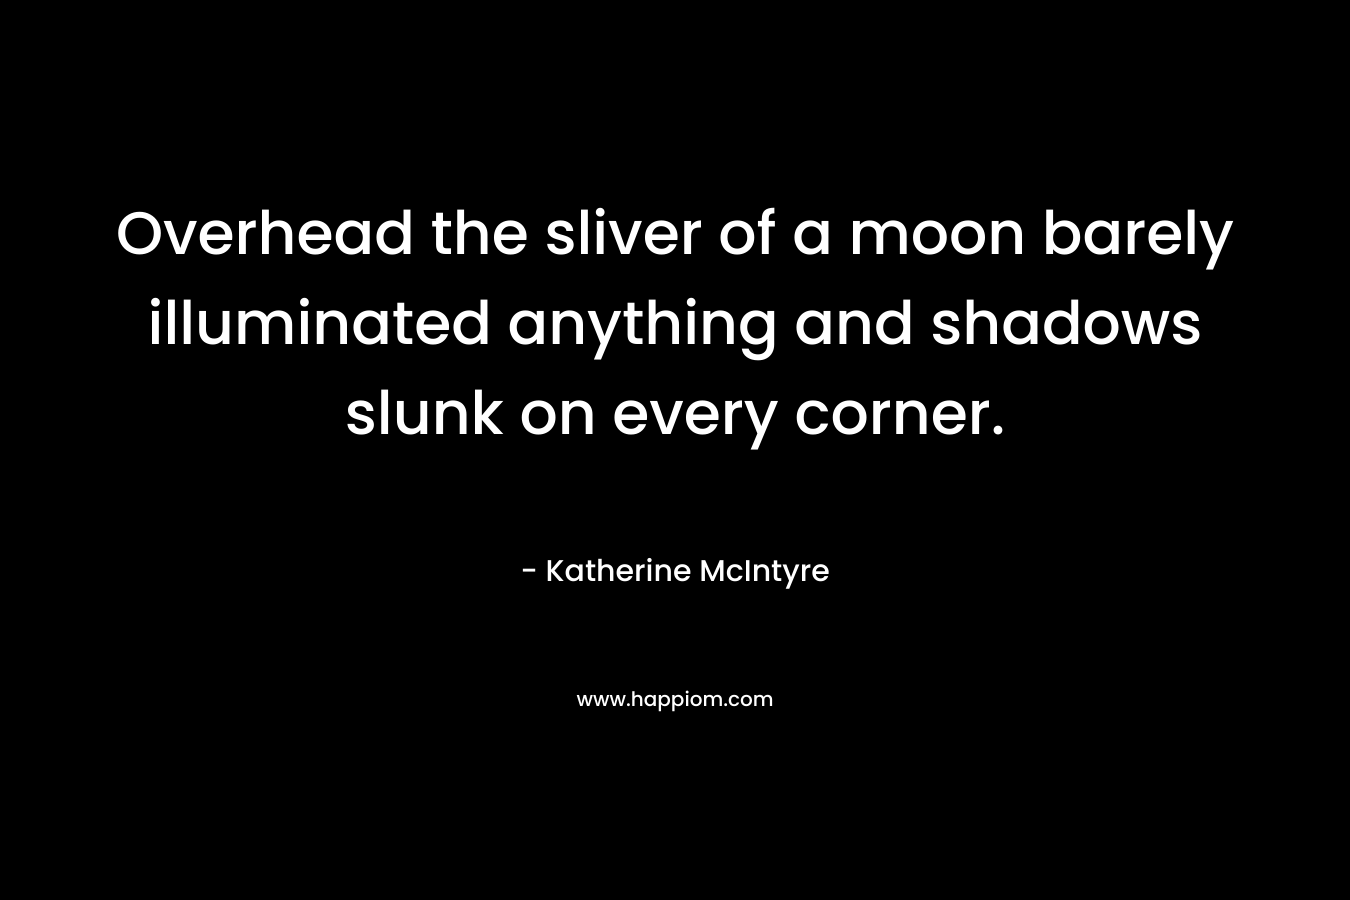 Overhead the sliver of a moon barely illuminated anything and shadows slunk on every corner. – Katherine McIntyre